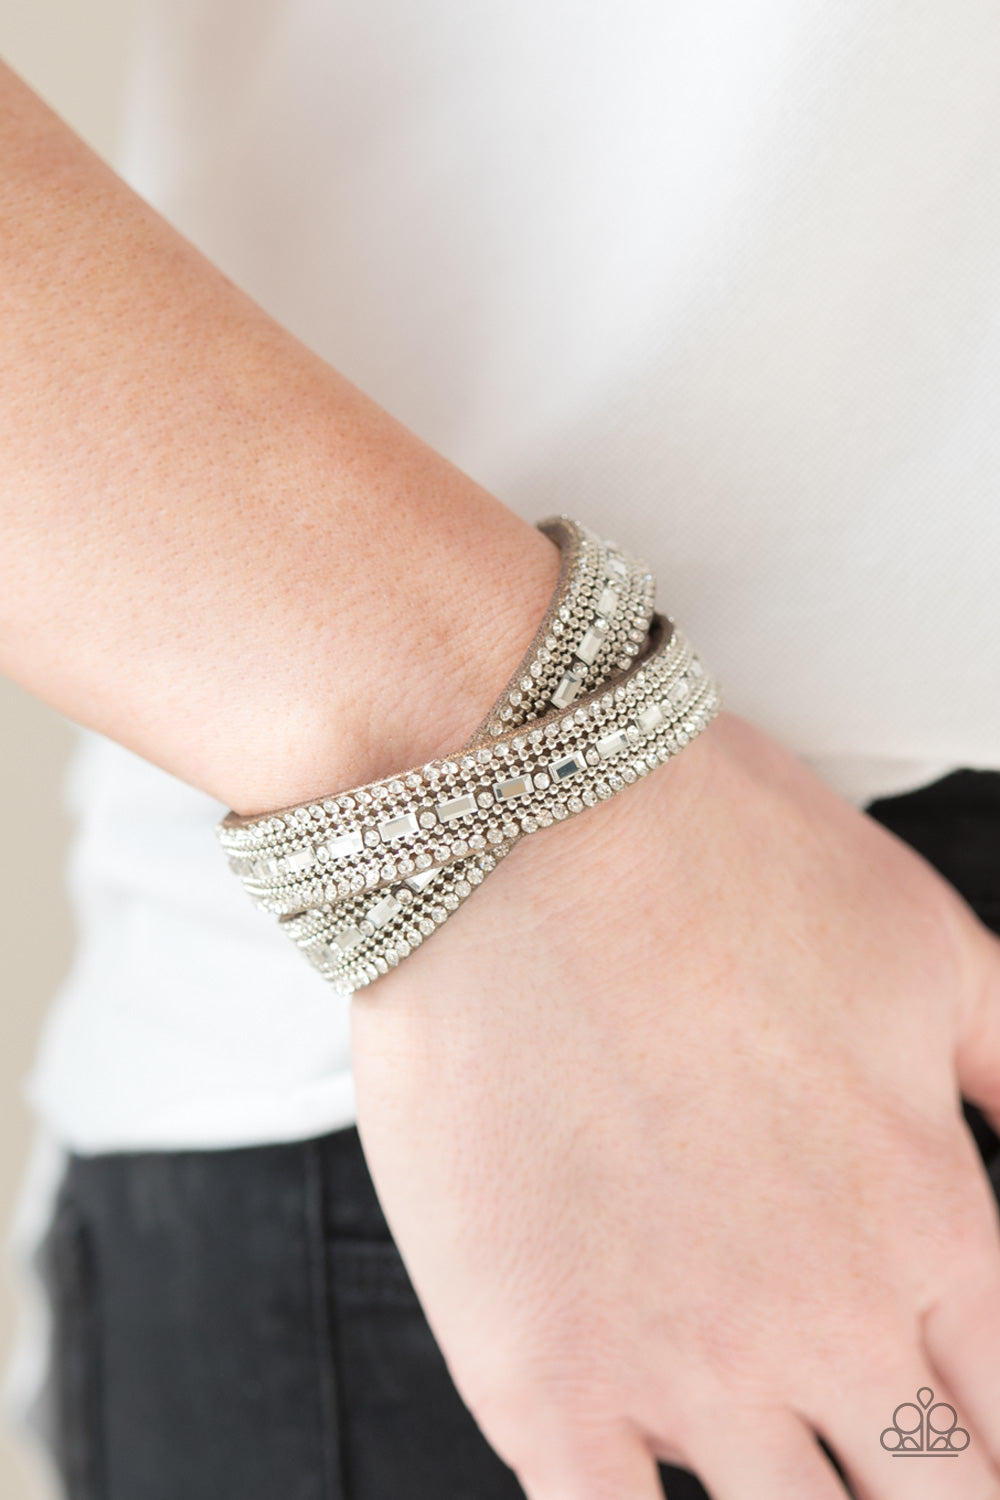 Shimmer and Sass Brown
Wrap Bracelet